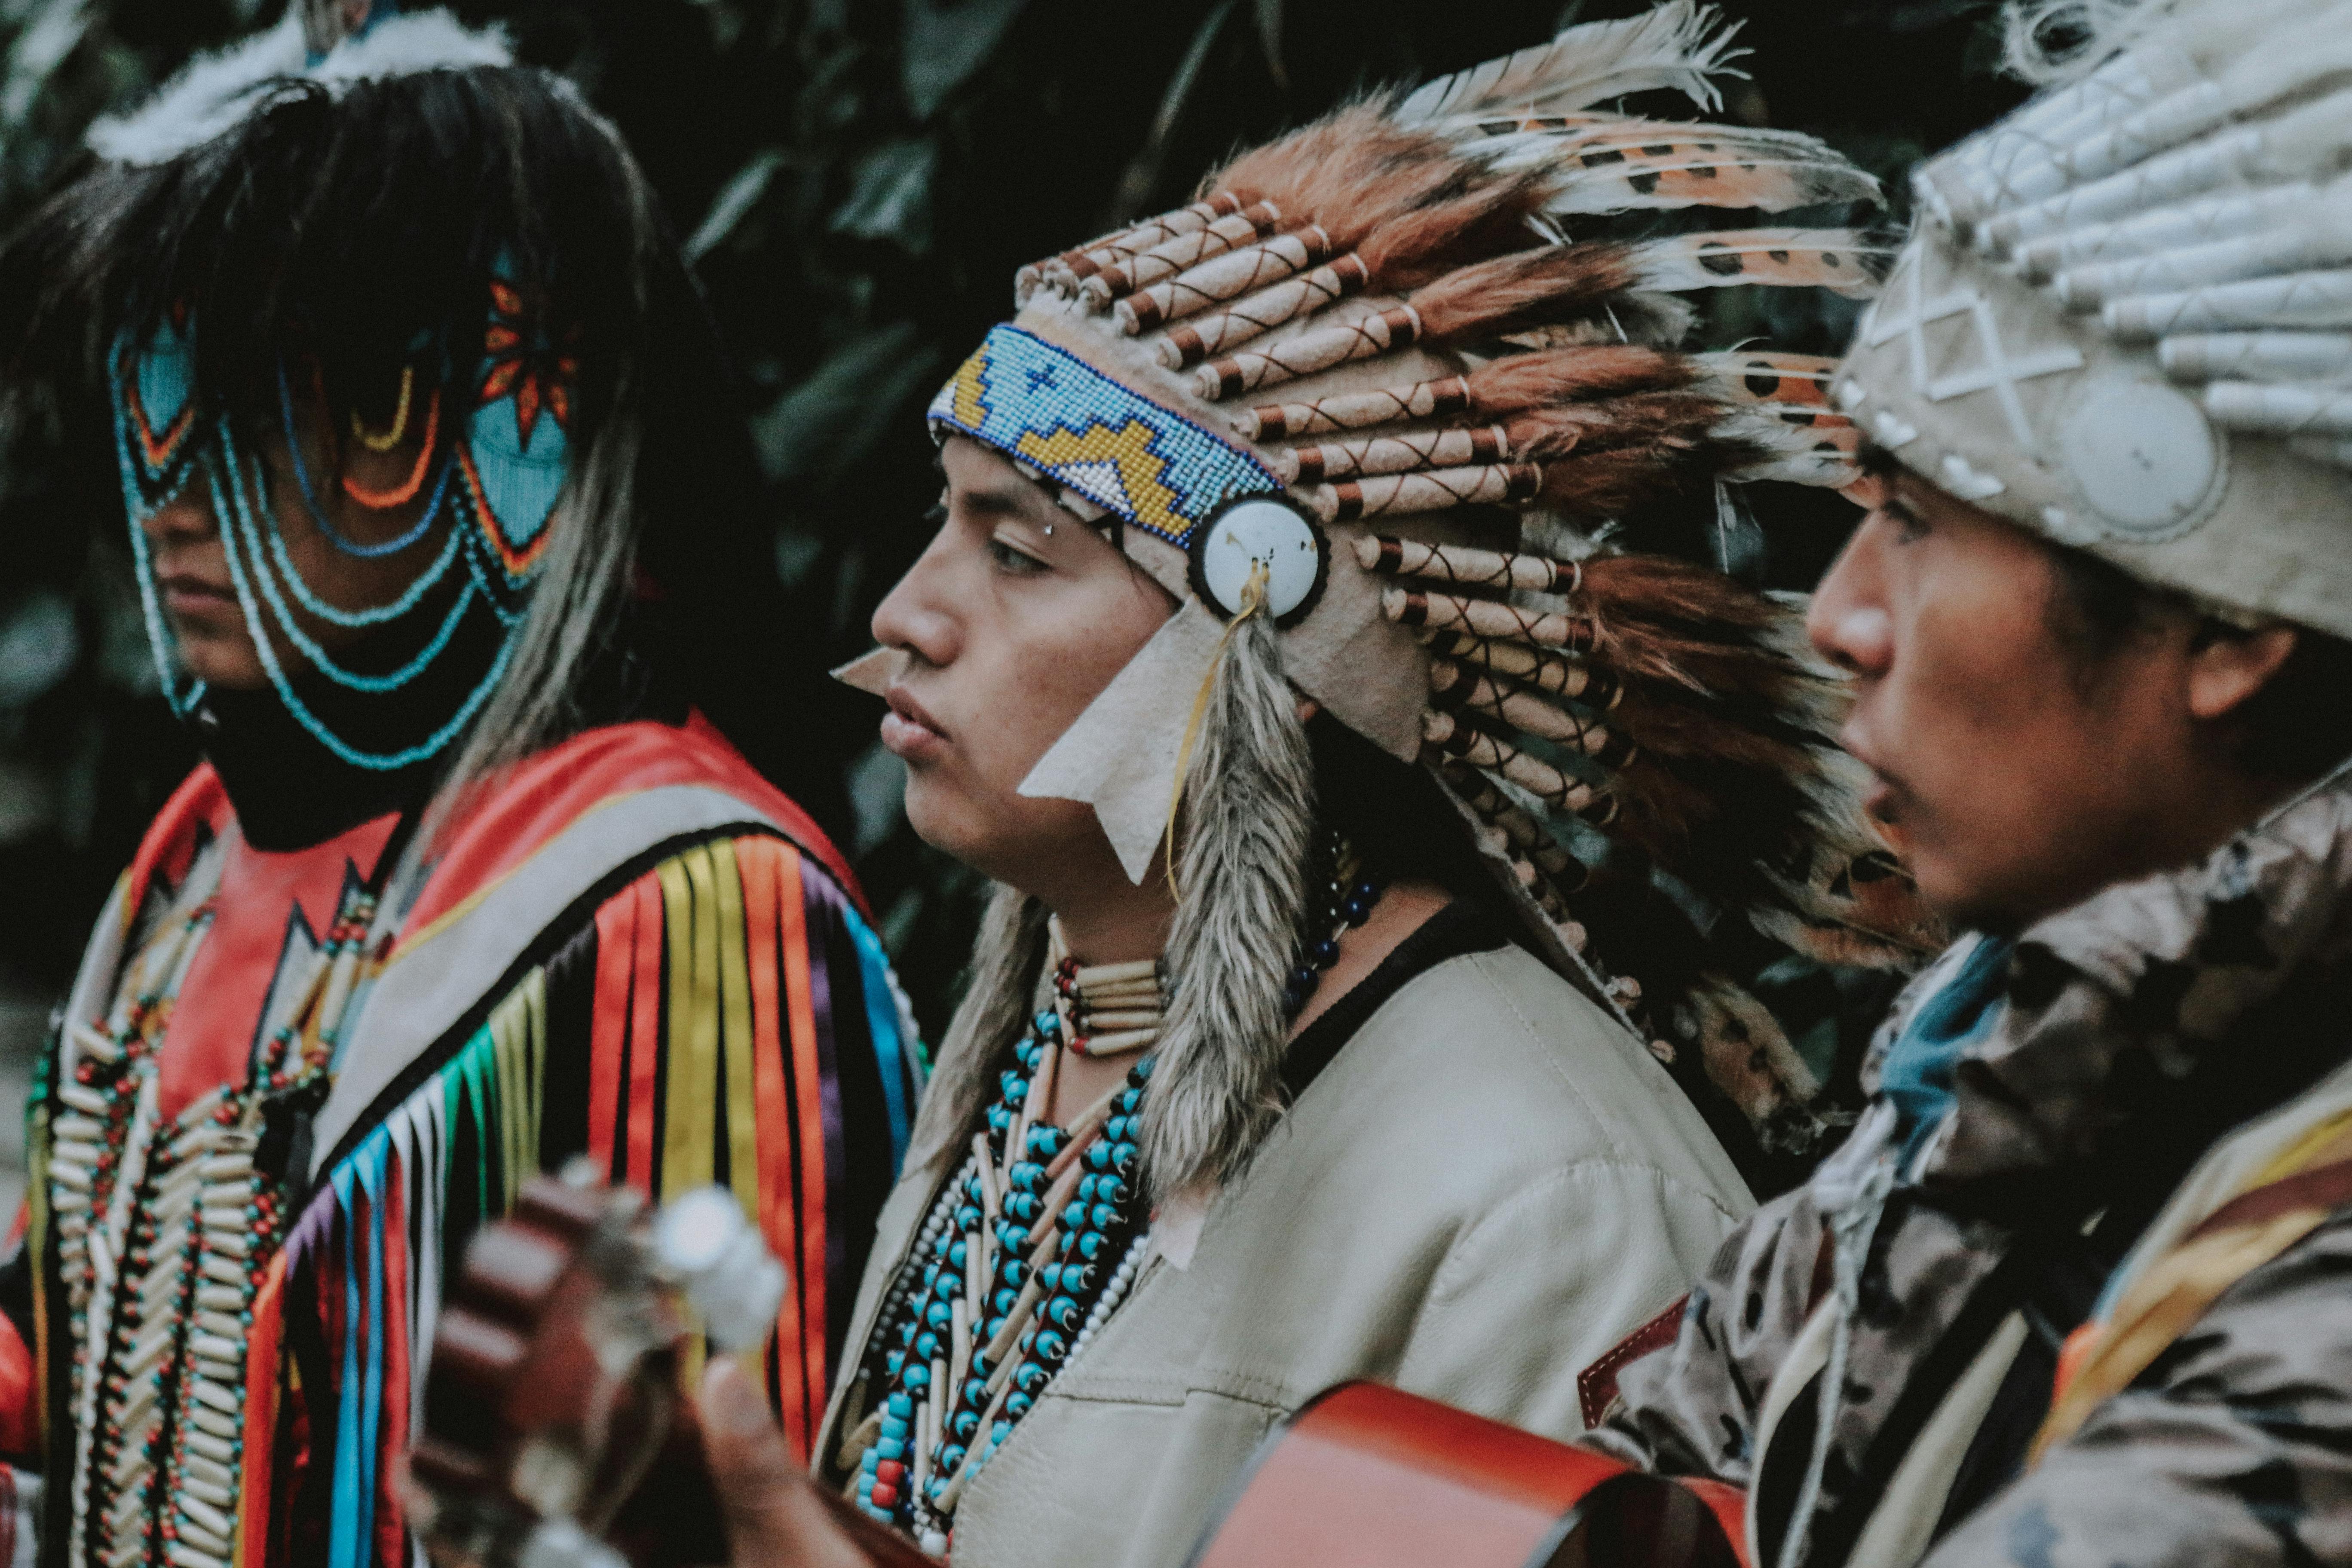 native Americans in their traditional attire | Source: Pexels